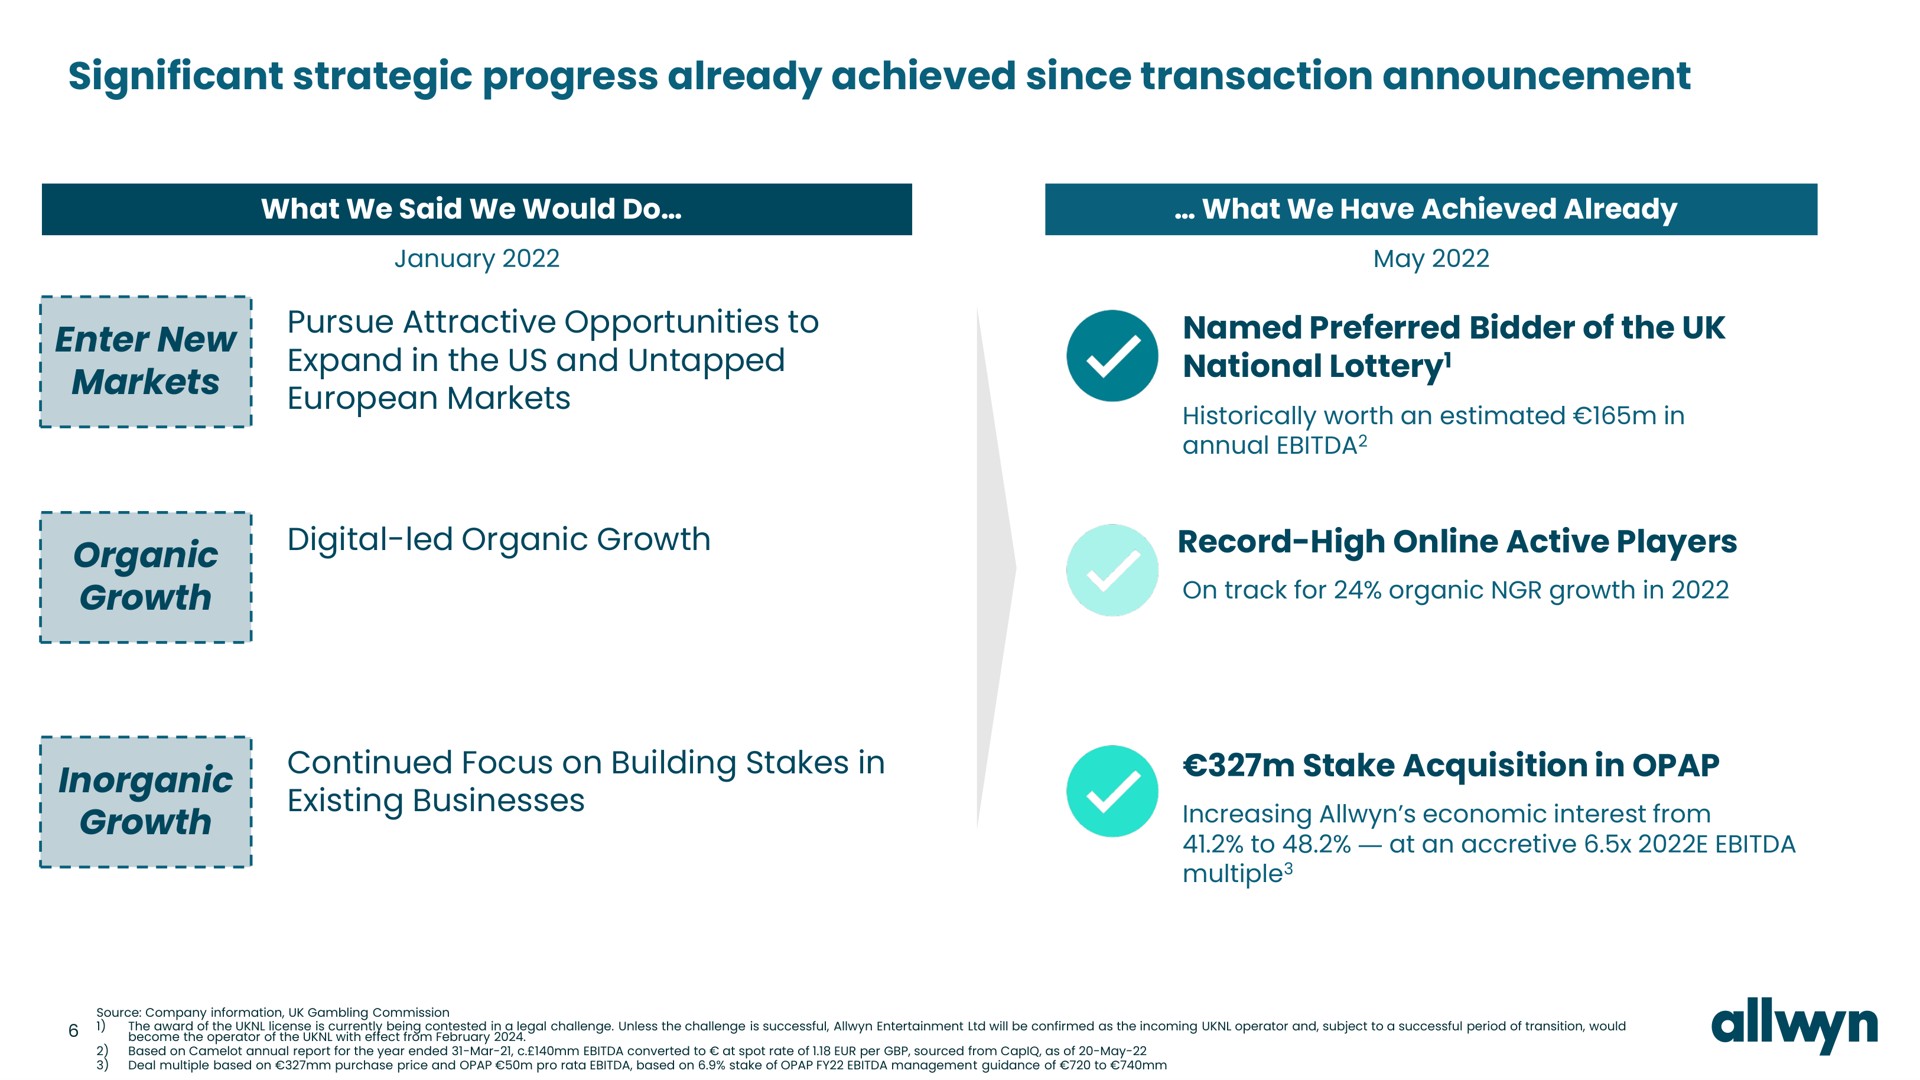 significant strategic progress already achieved since transaction announcement what we said we would do what we have achieved already enter new markets pursue attractive opportunities to expand in the us and untapped markets digital led organic growth organic growth named preferred bidder of the national lottery record high active players inorganic growth continued focus on building stakes in existing businesses stake acquisition in lottery lottery | Allwyn